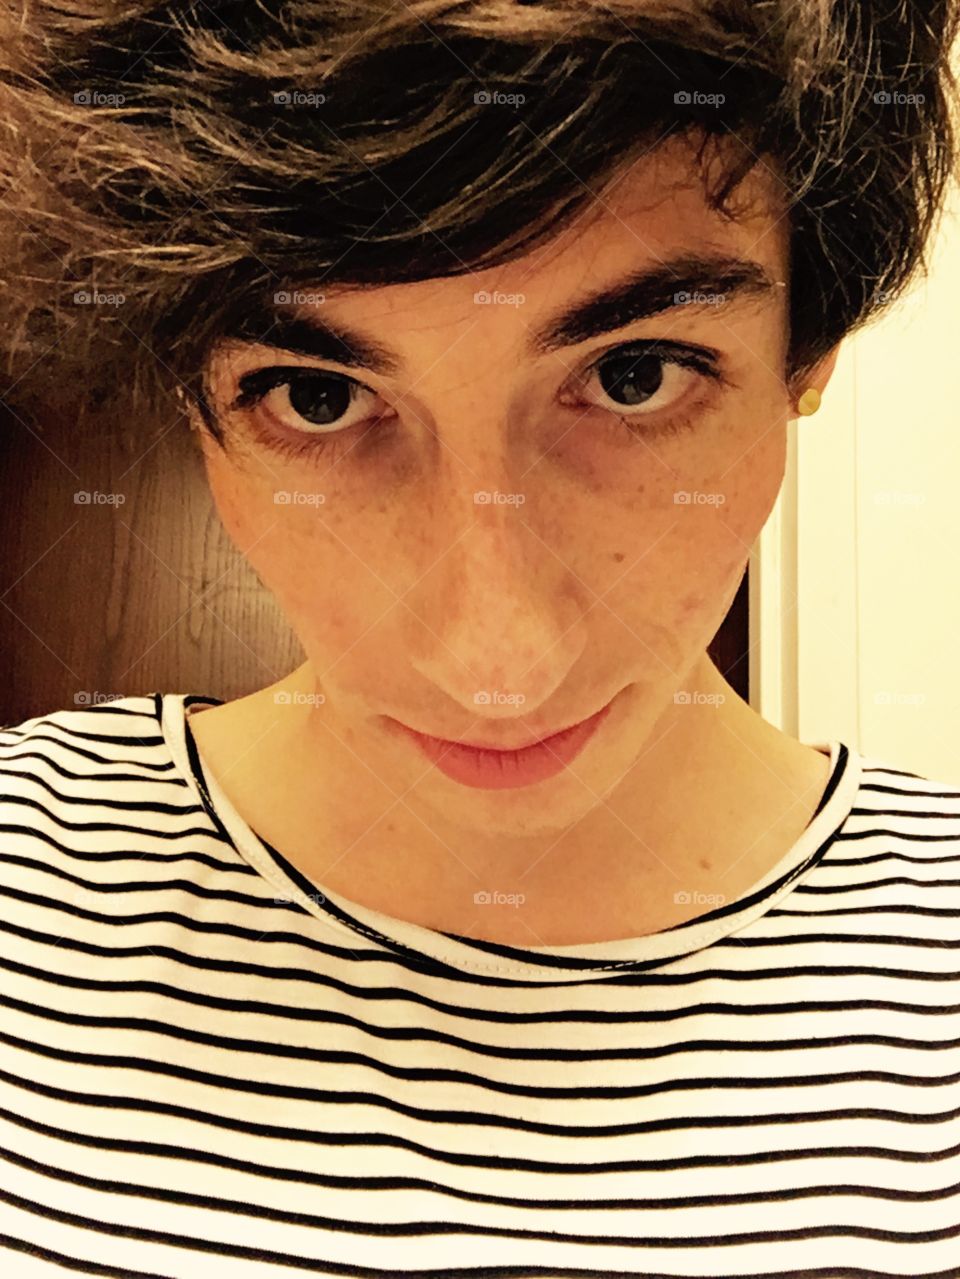 Androgynous picture of myself.  
Guy dresses and puts on make up. 
MtF